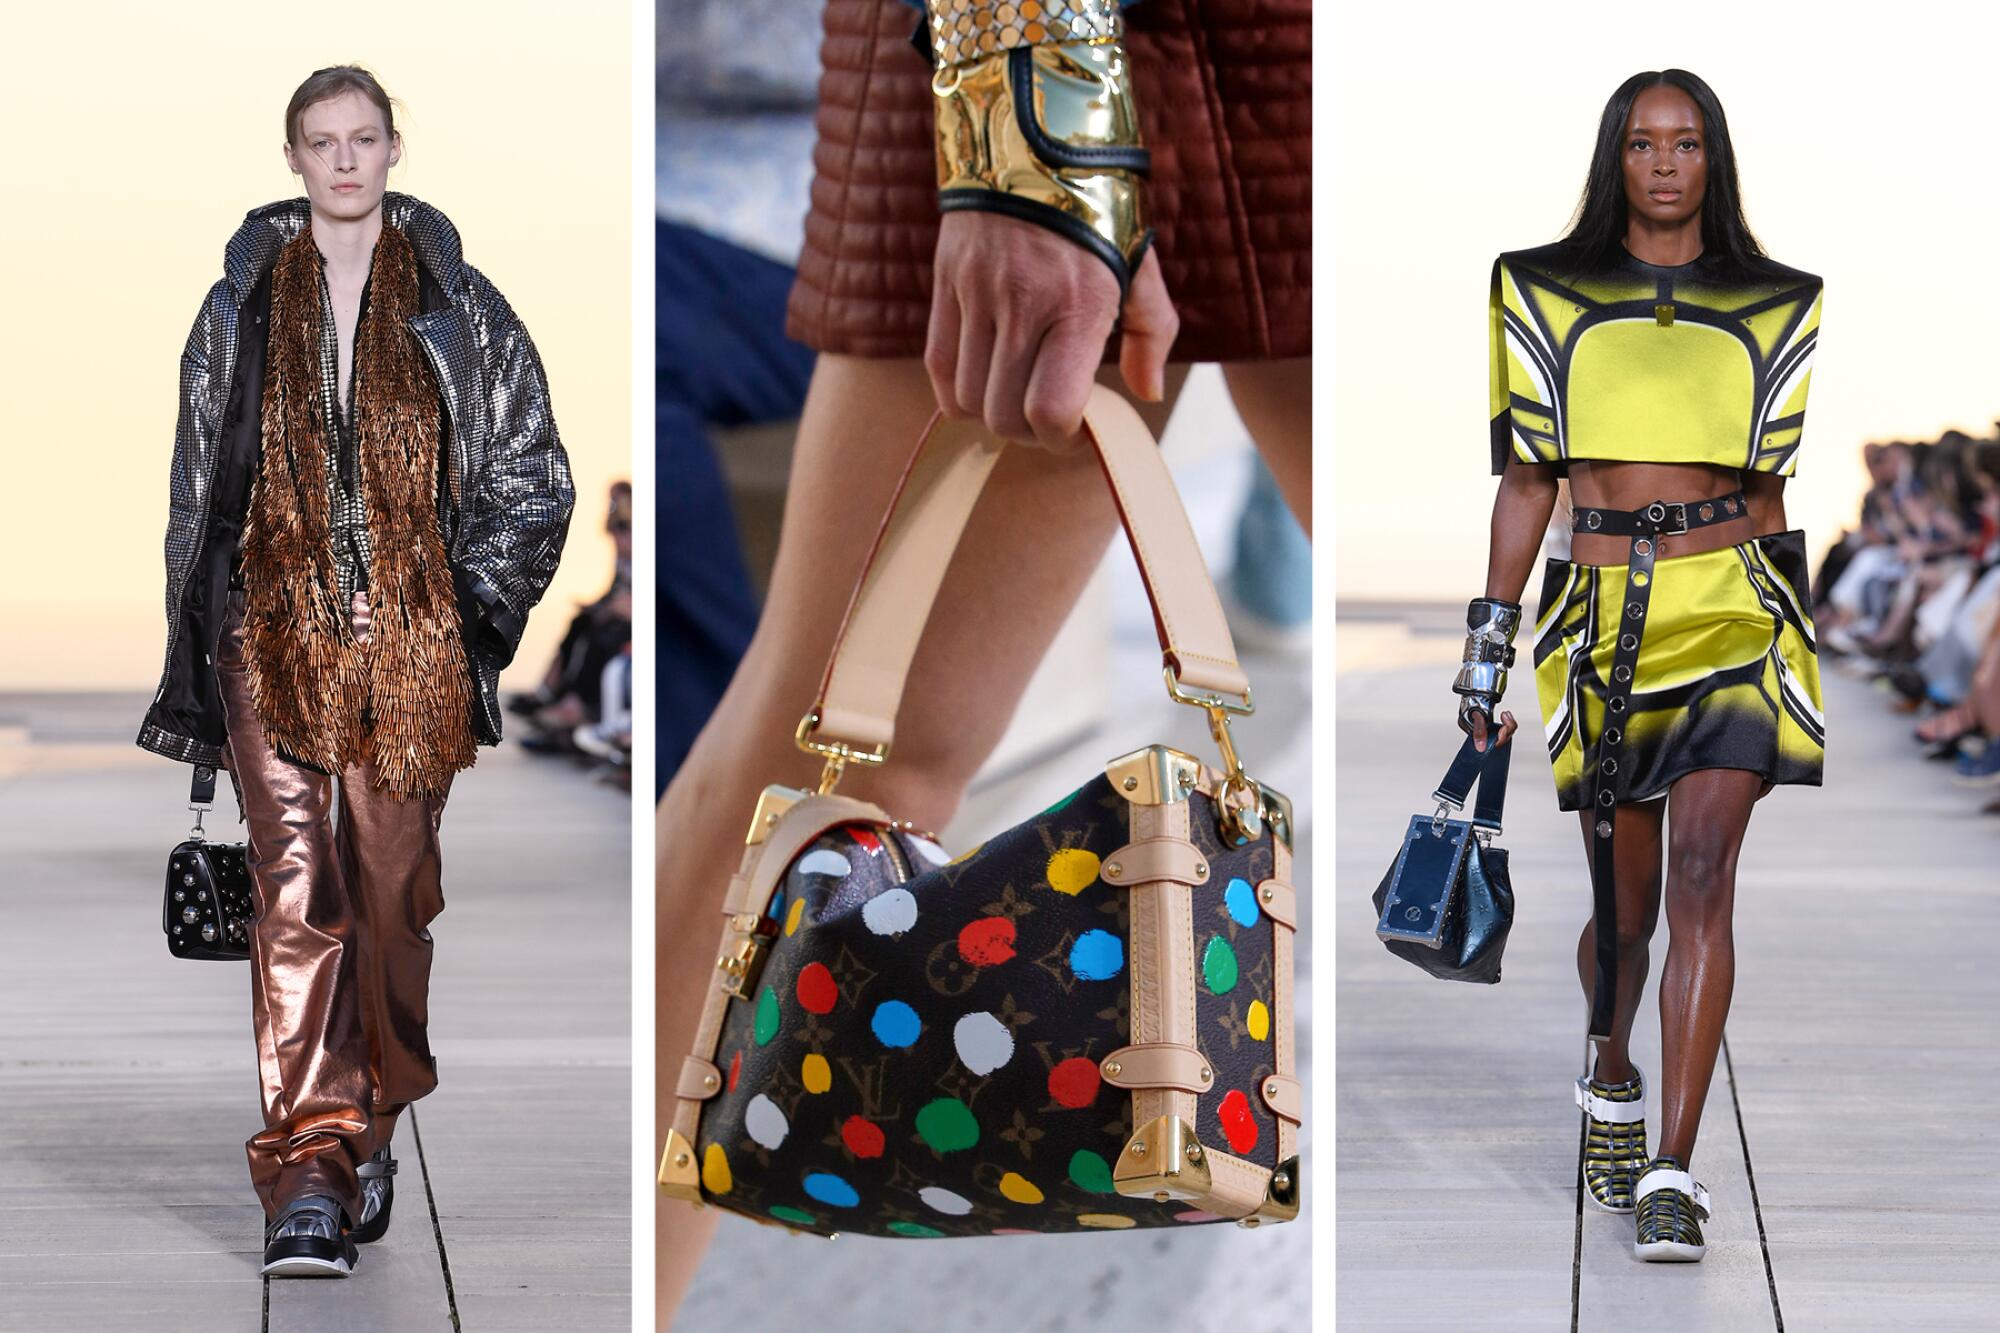 Looks from the Louis Vuitton 2023 Cruise collection, presented at the Salk Institute on Thursday, May 12, 2022.